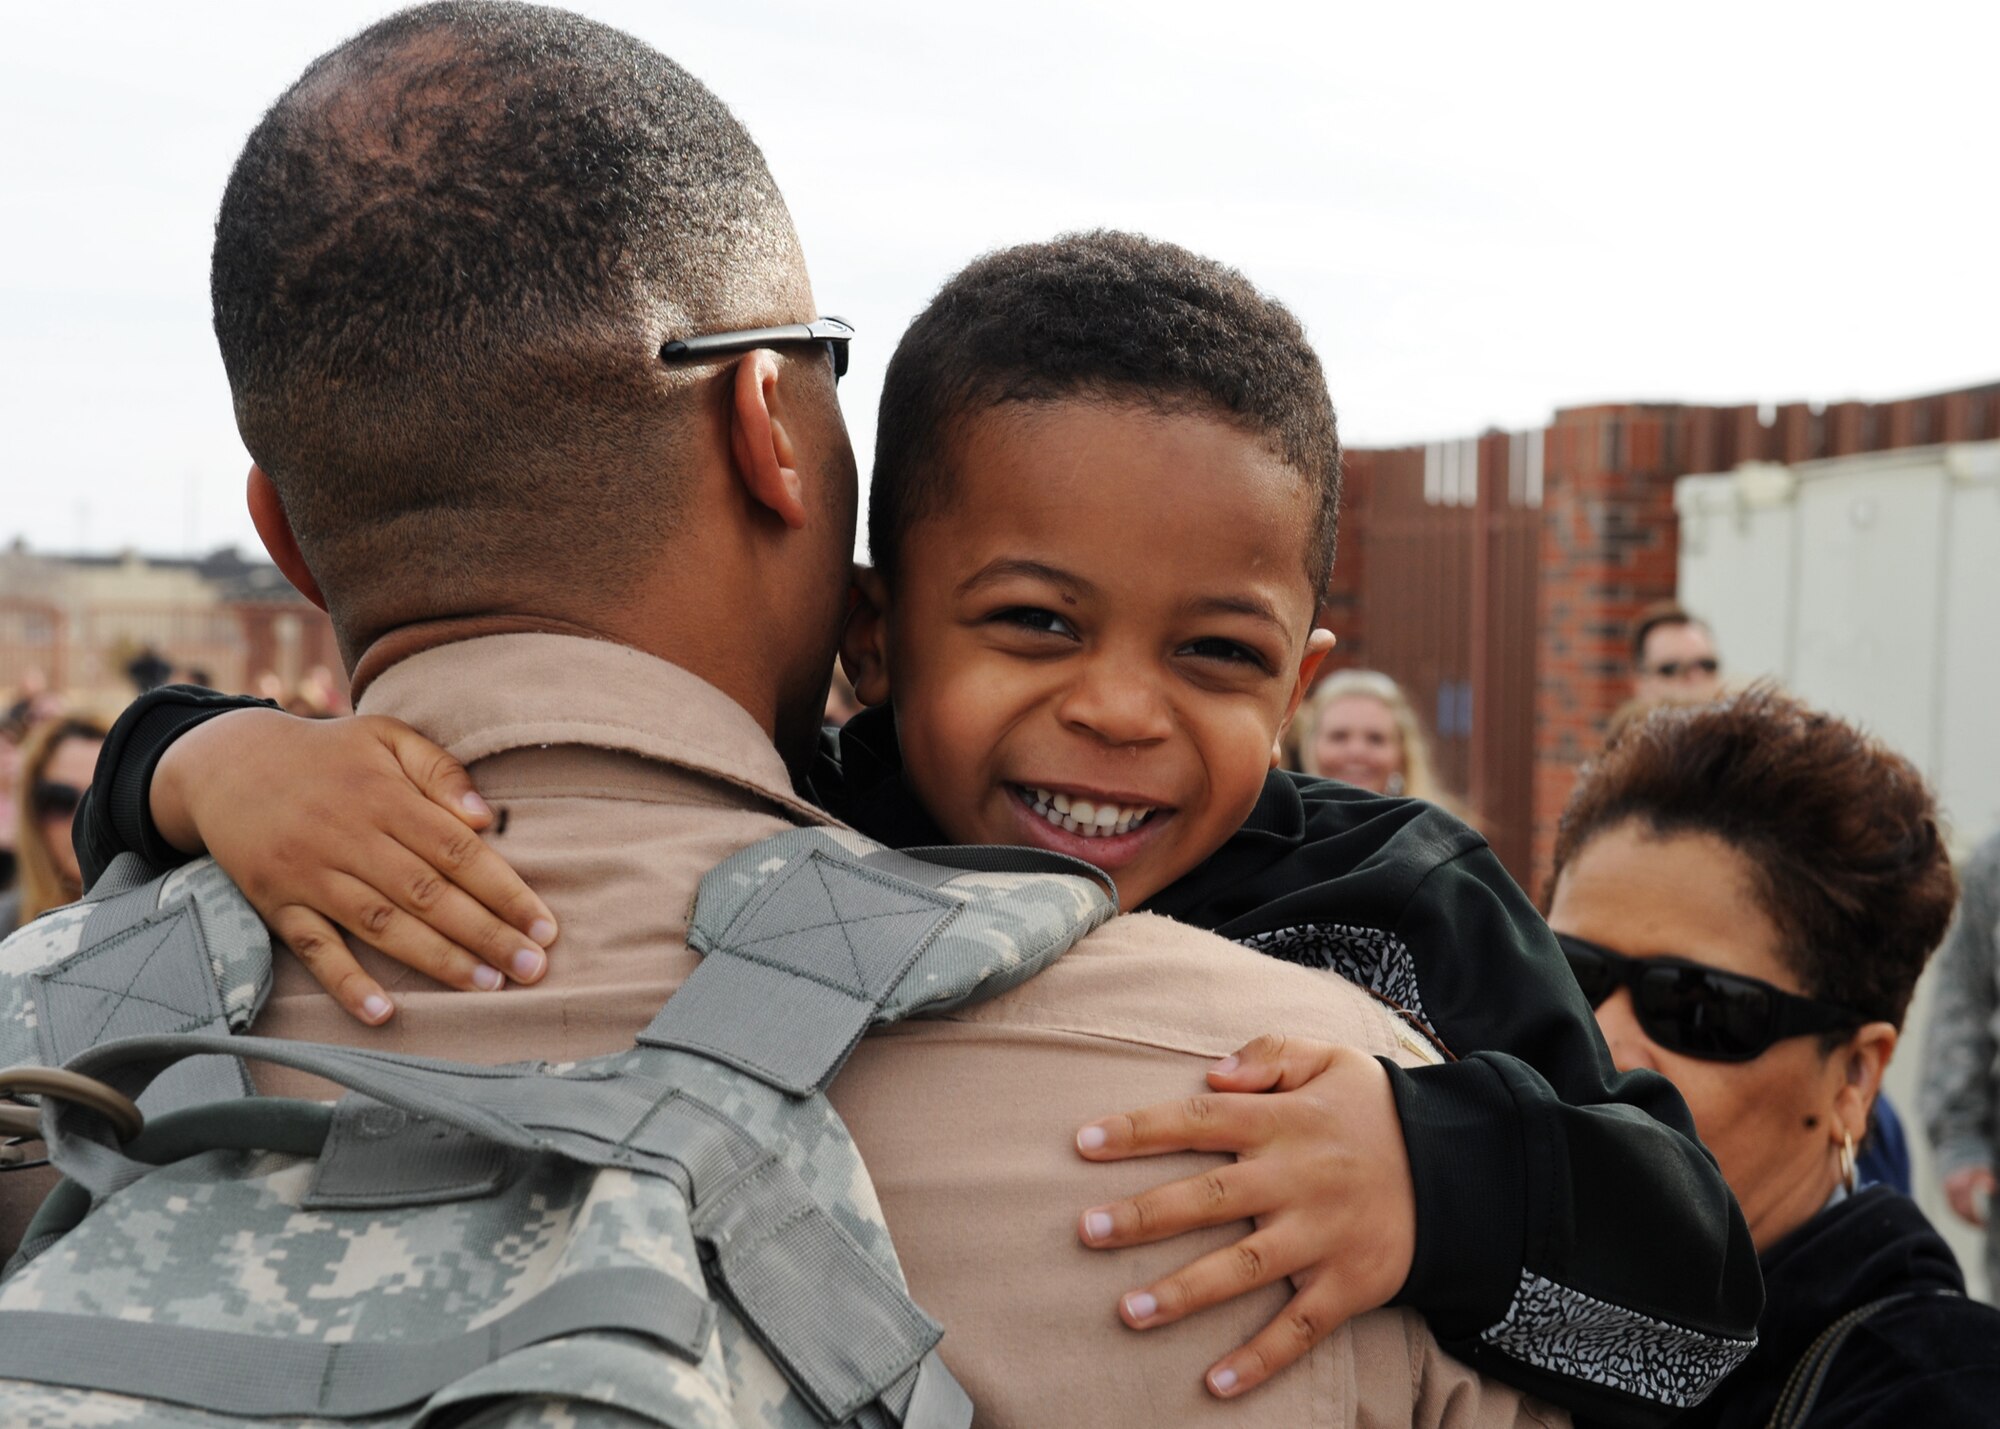 Tech. Sgt. Robert Furbush, 39th Airlift Squadron, embraces his son, Robert Furbush, Jr., Jan. 16, 2012, after returning to Dyess Air Force Base, Texas. Furbush returned from a 4-month deployment to Southwest Asia.  (U.S. Air Force photo Airman 1st Class Peter Thompson/Released)